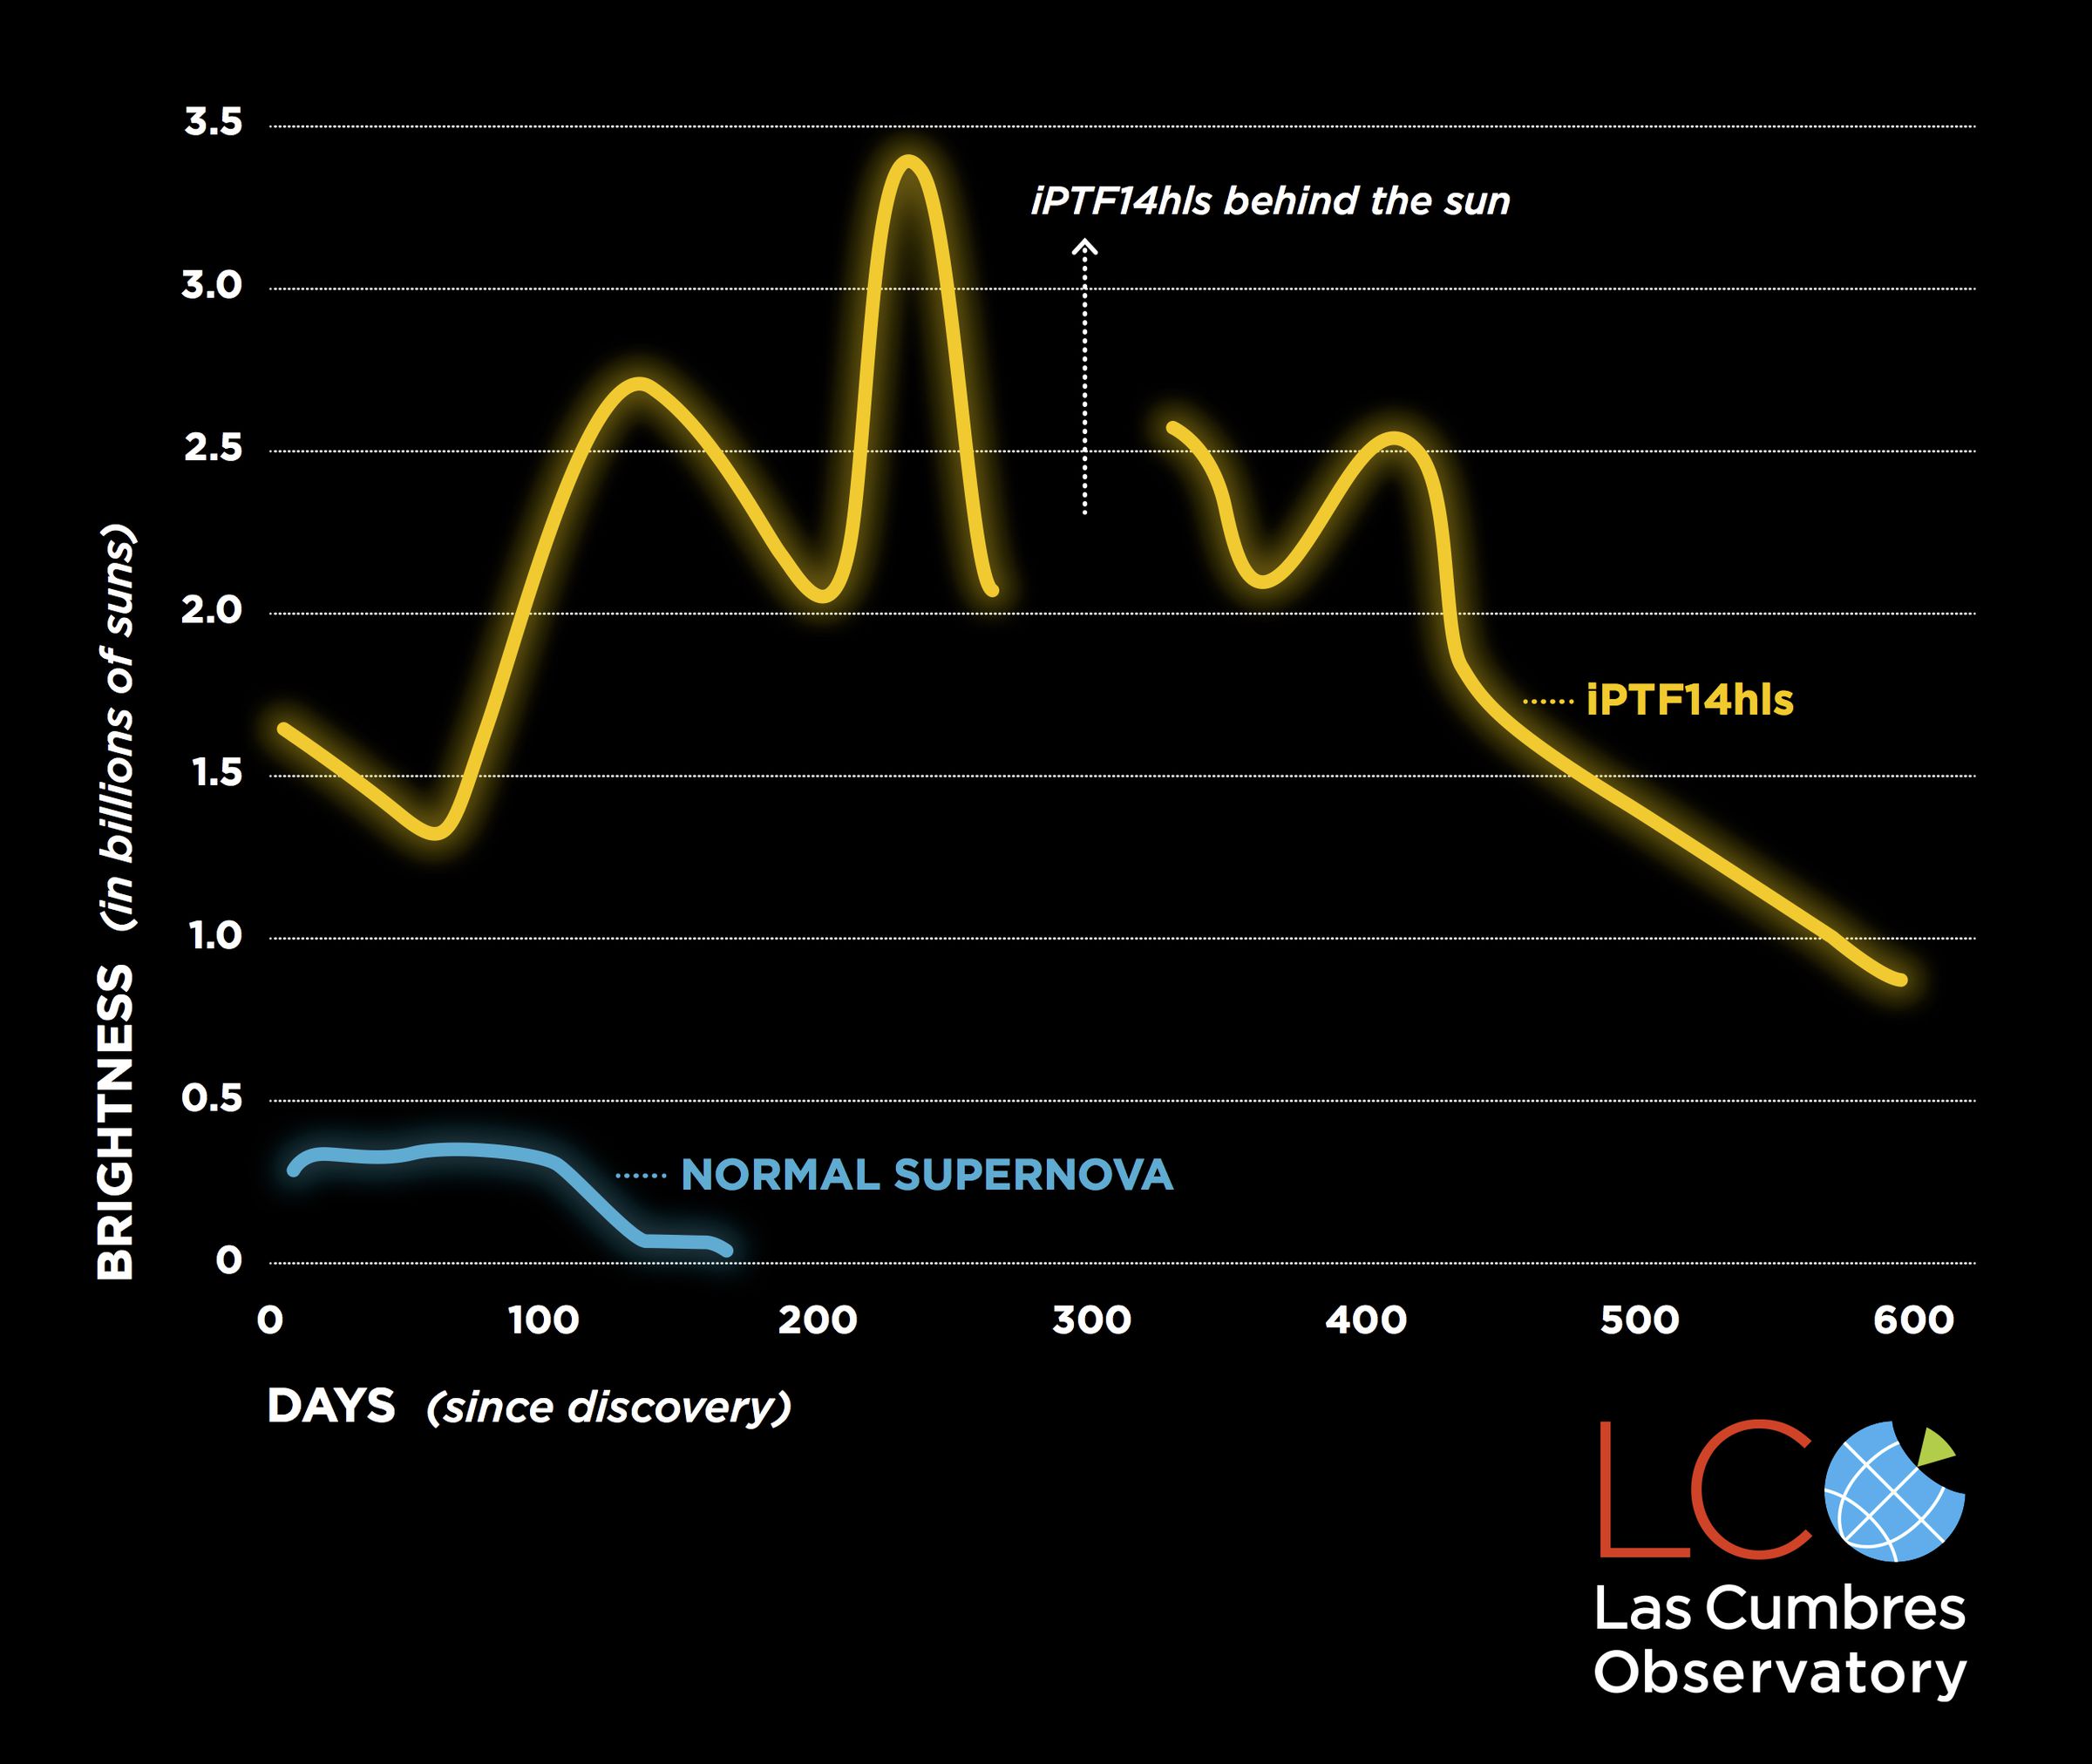 The fluctuating light curve of the 600-day supernova, compared to a standard 100-day supernova.